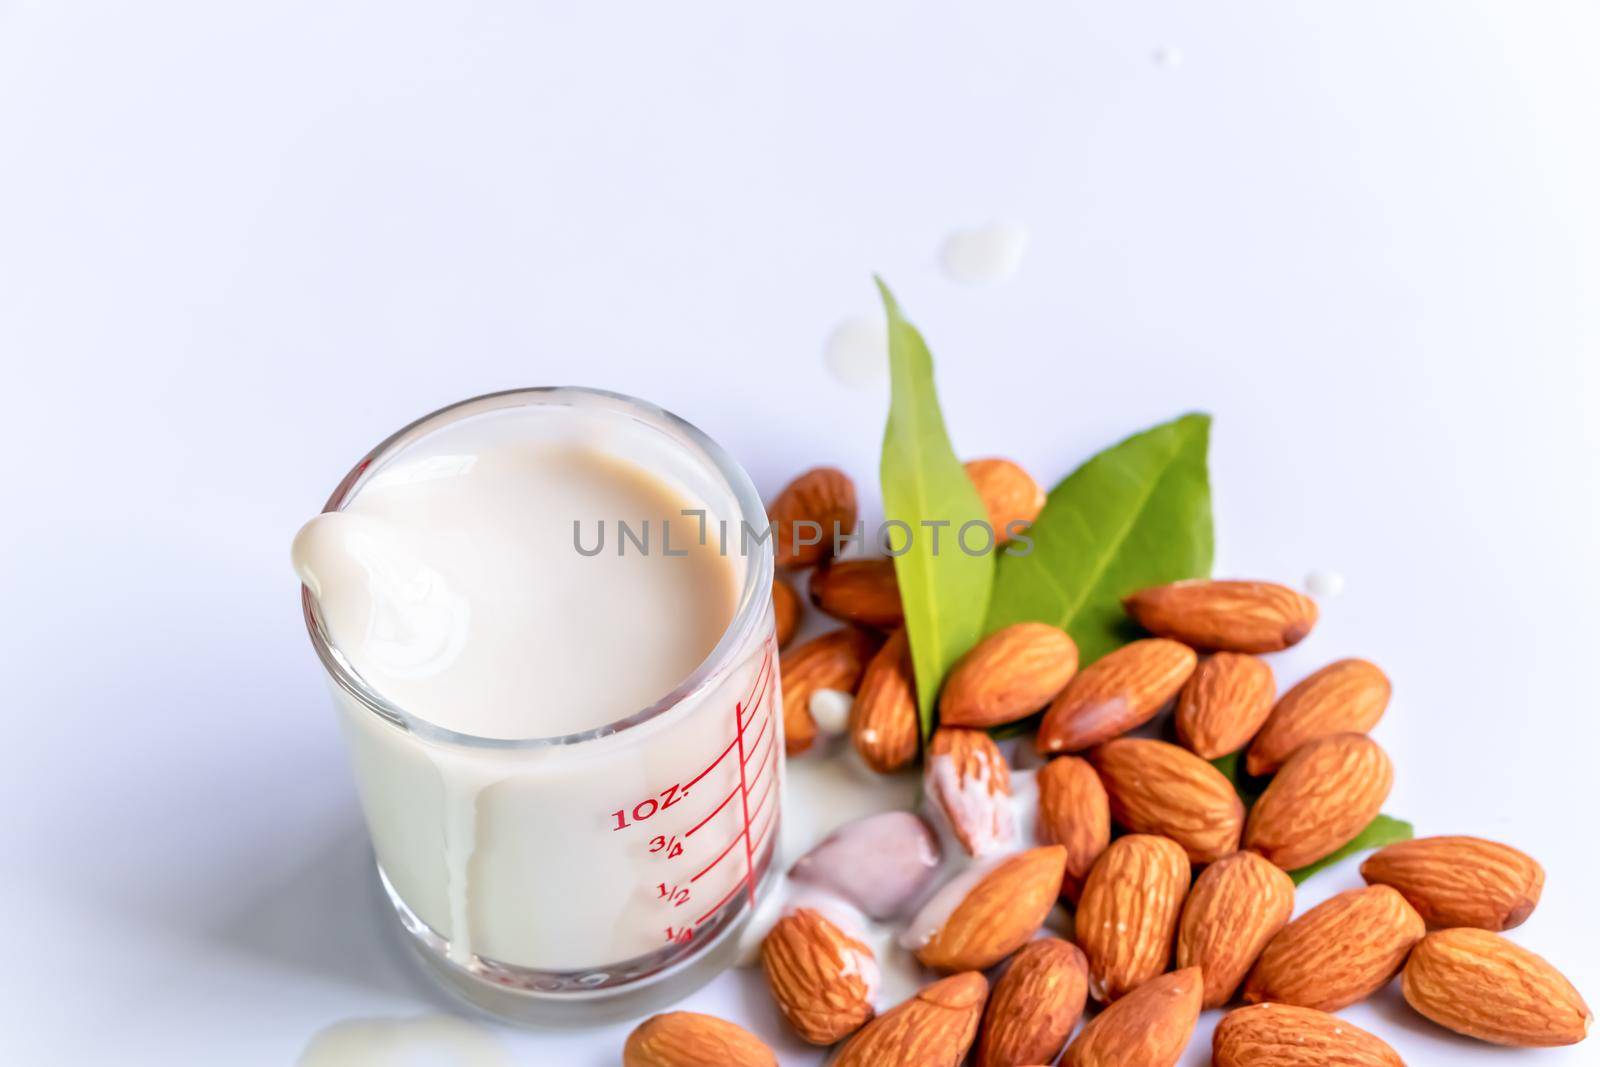 Almond milk in glass with almonds on wooden table by atitaph